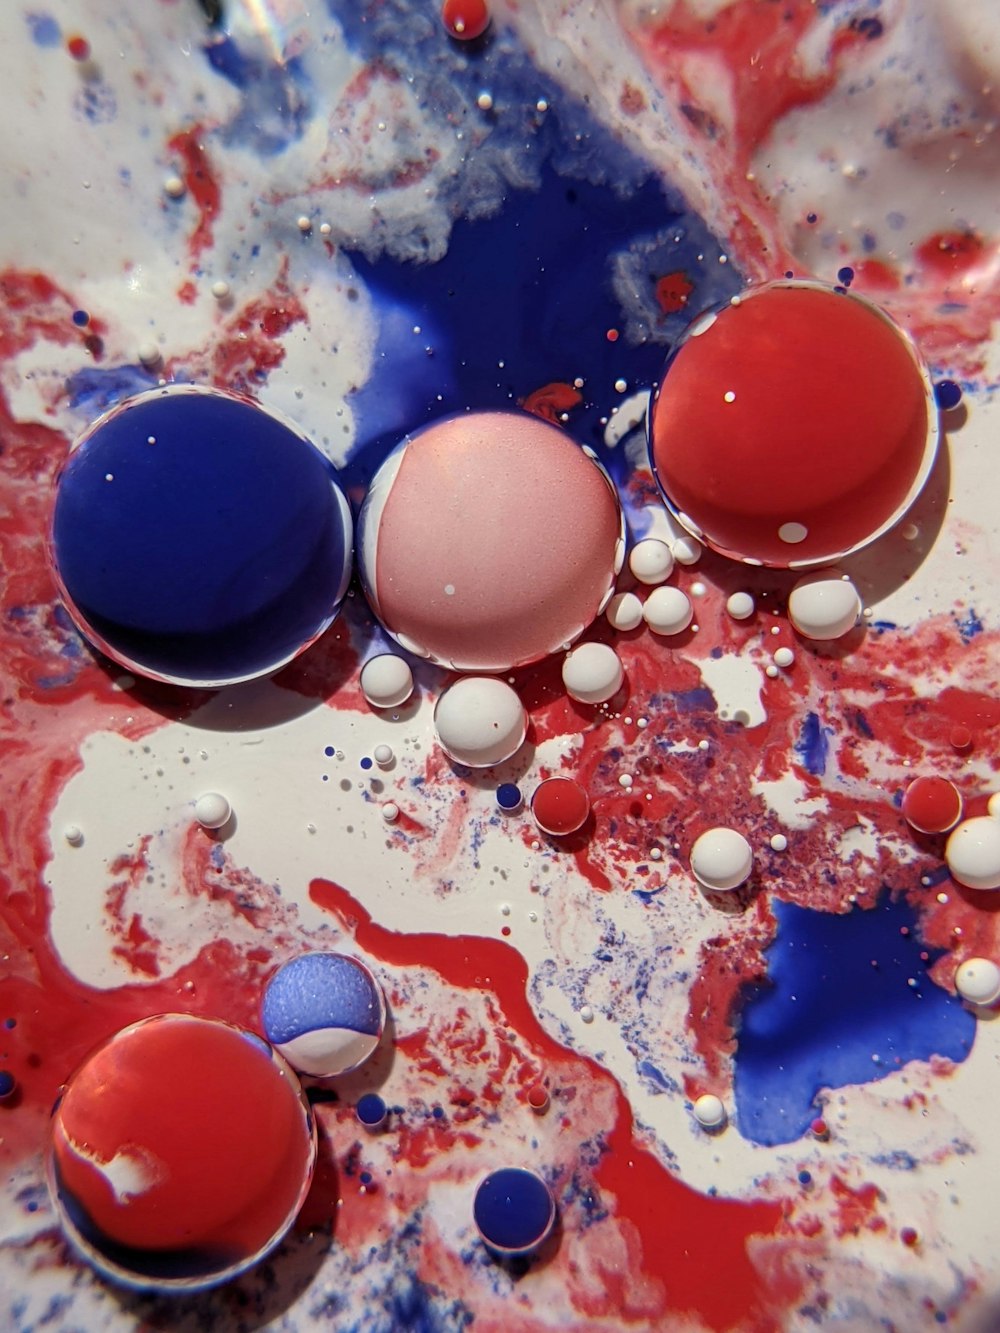 a close up of a bowl of paint with red, white, and blue colors